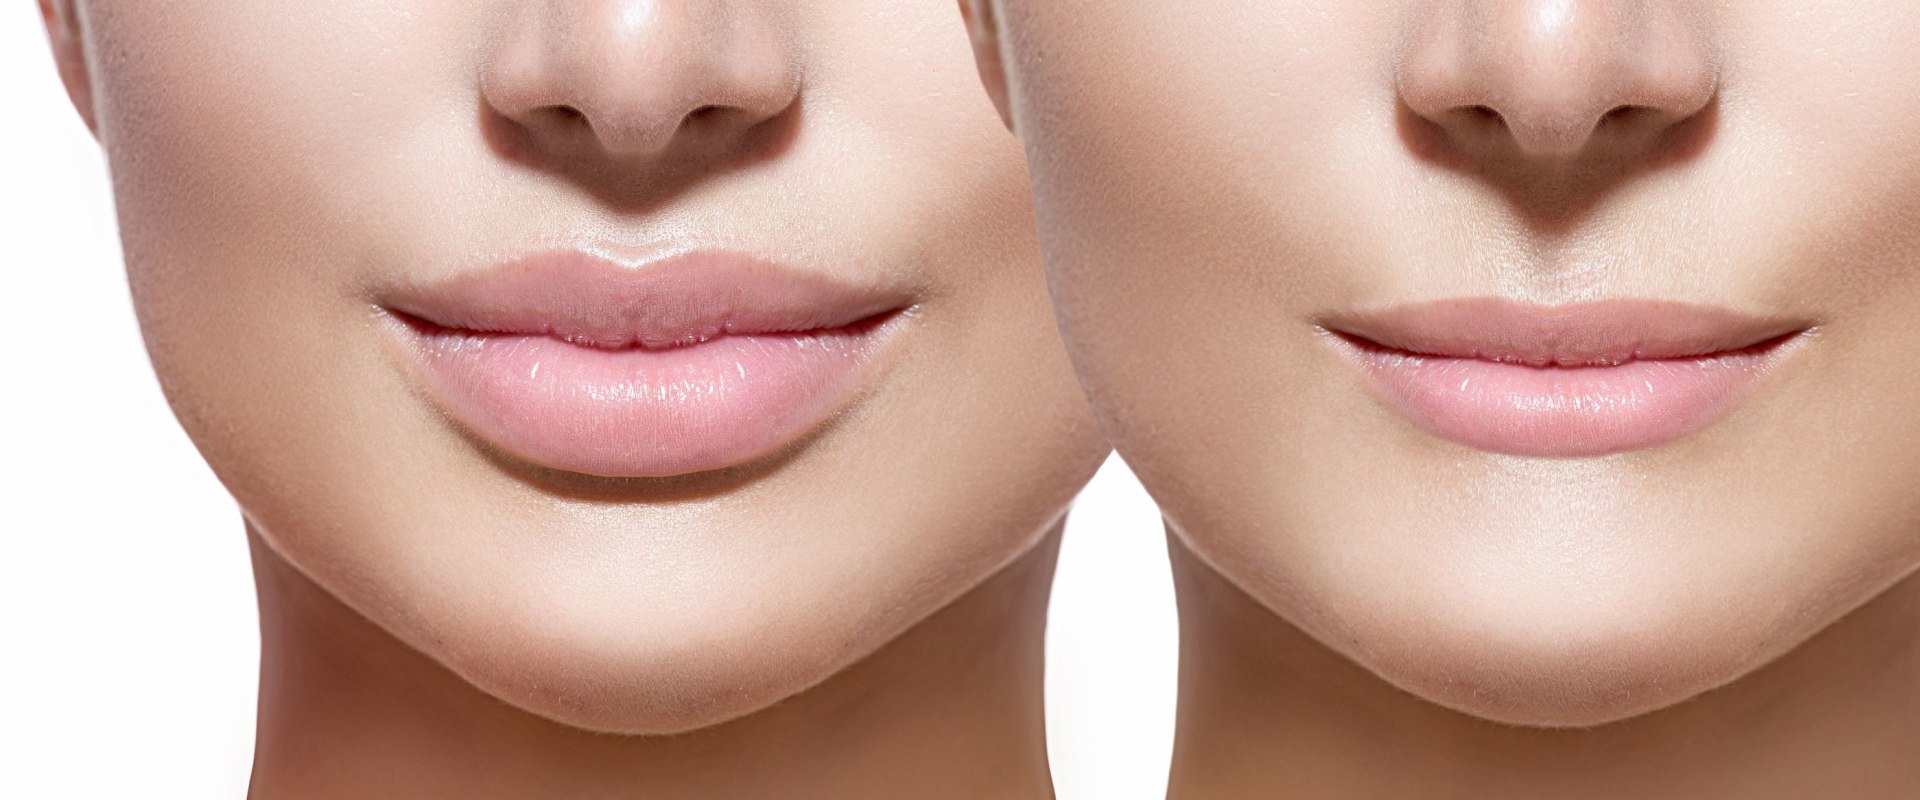 Can Dysport Enhance Your Lips?